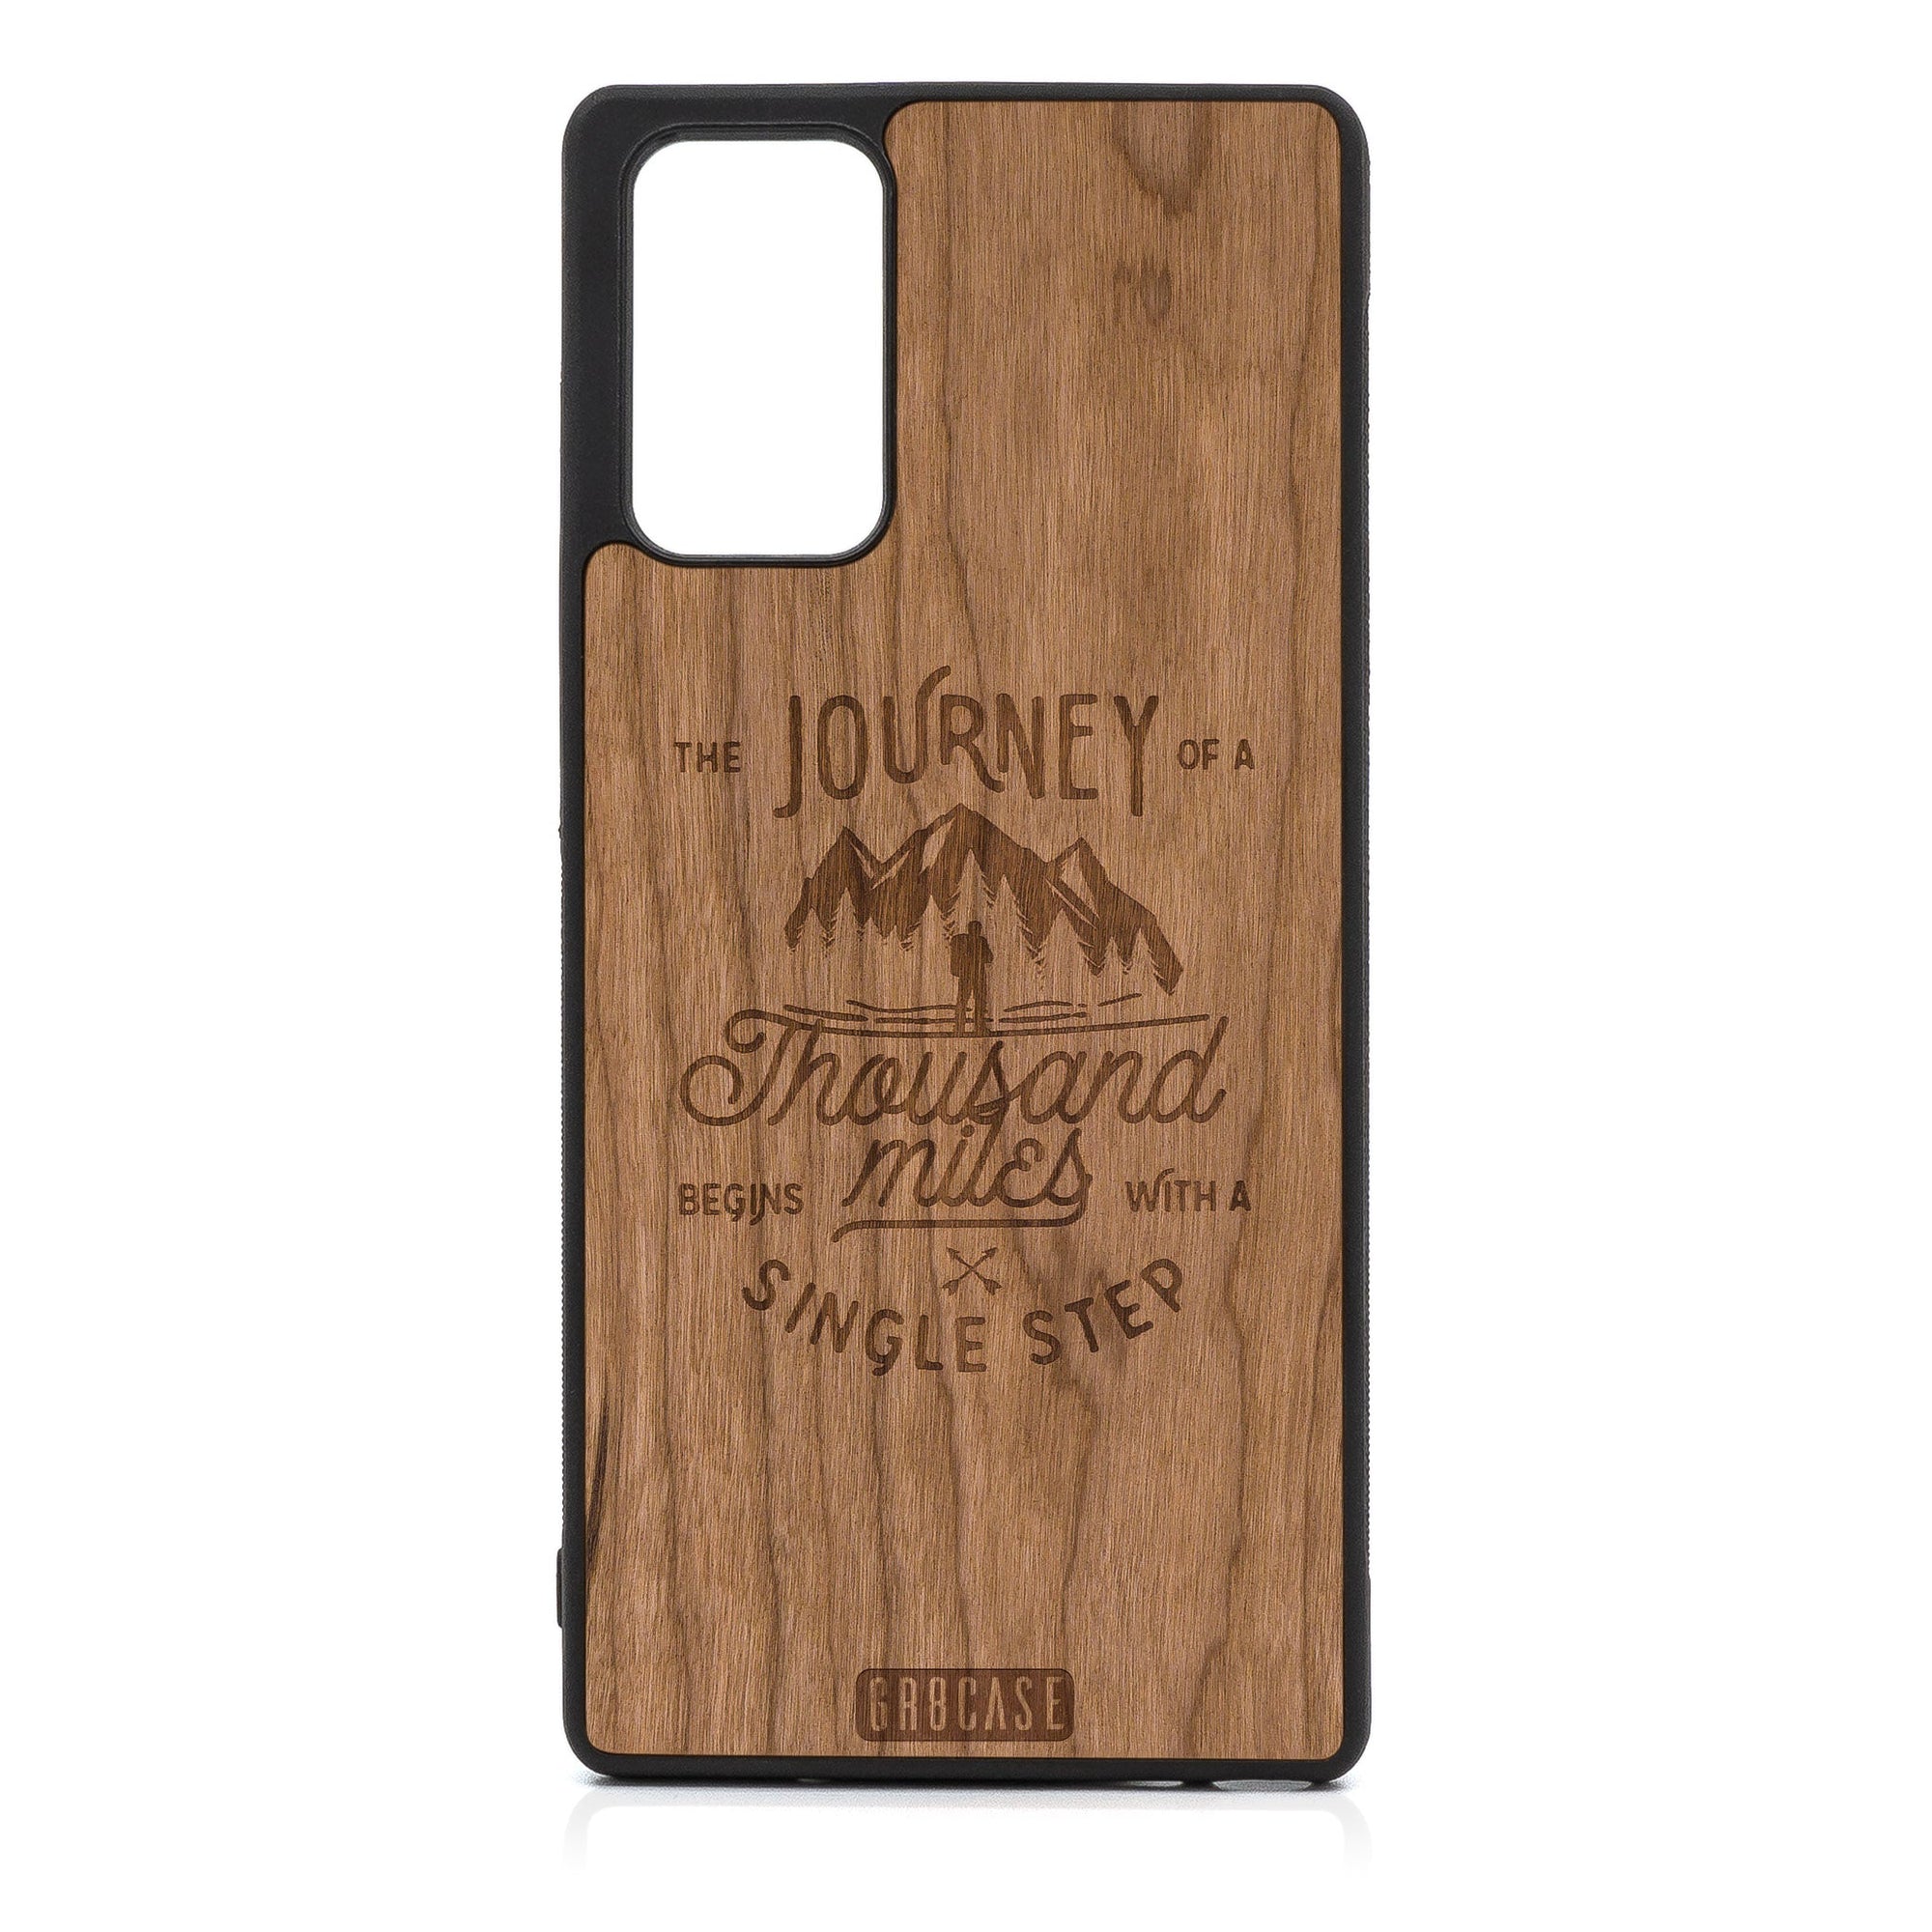 The Journey Of A Thousand Miles Begins With A Single Step Design Wood Case For Samsung Galaxy A52 5G